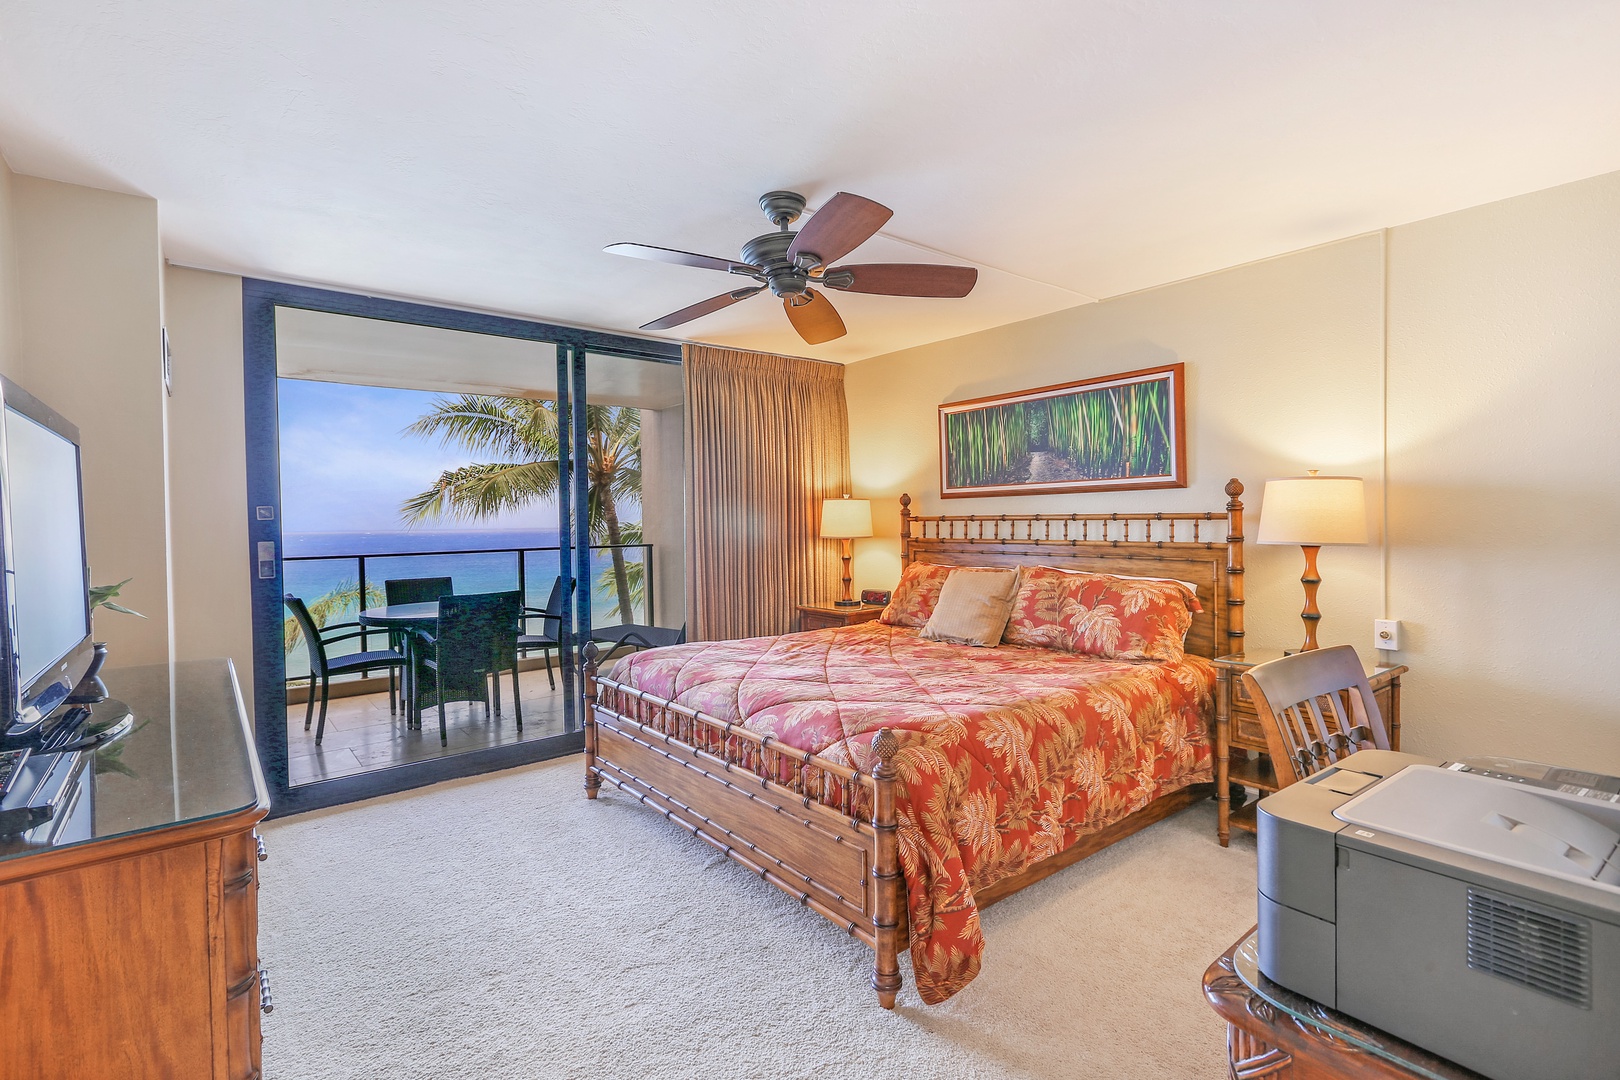 Bedroom with king bed, lanai access, and en-suite